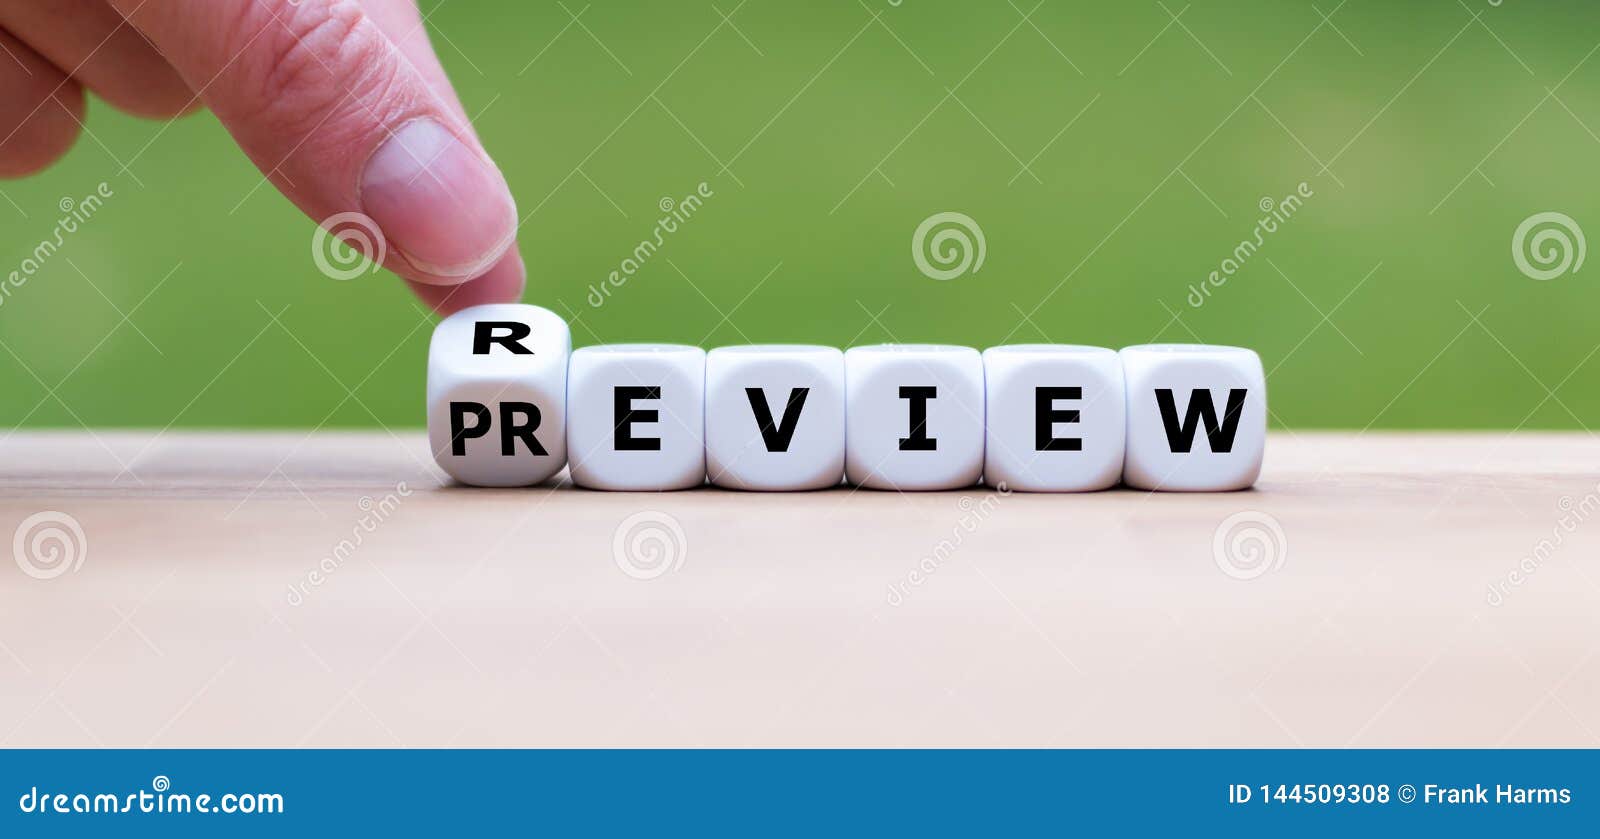 hand turns a dice and changes the word `review` to `preview`.